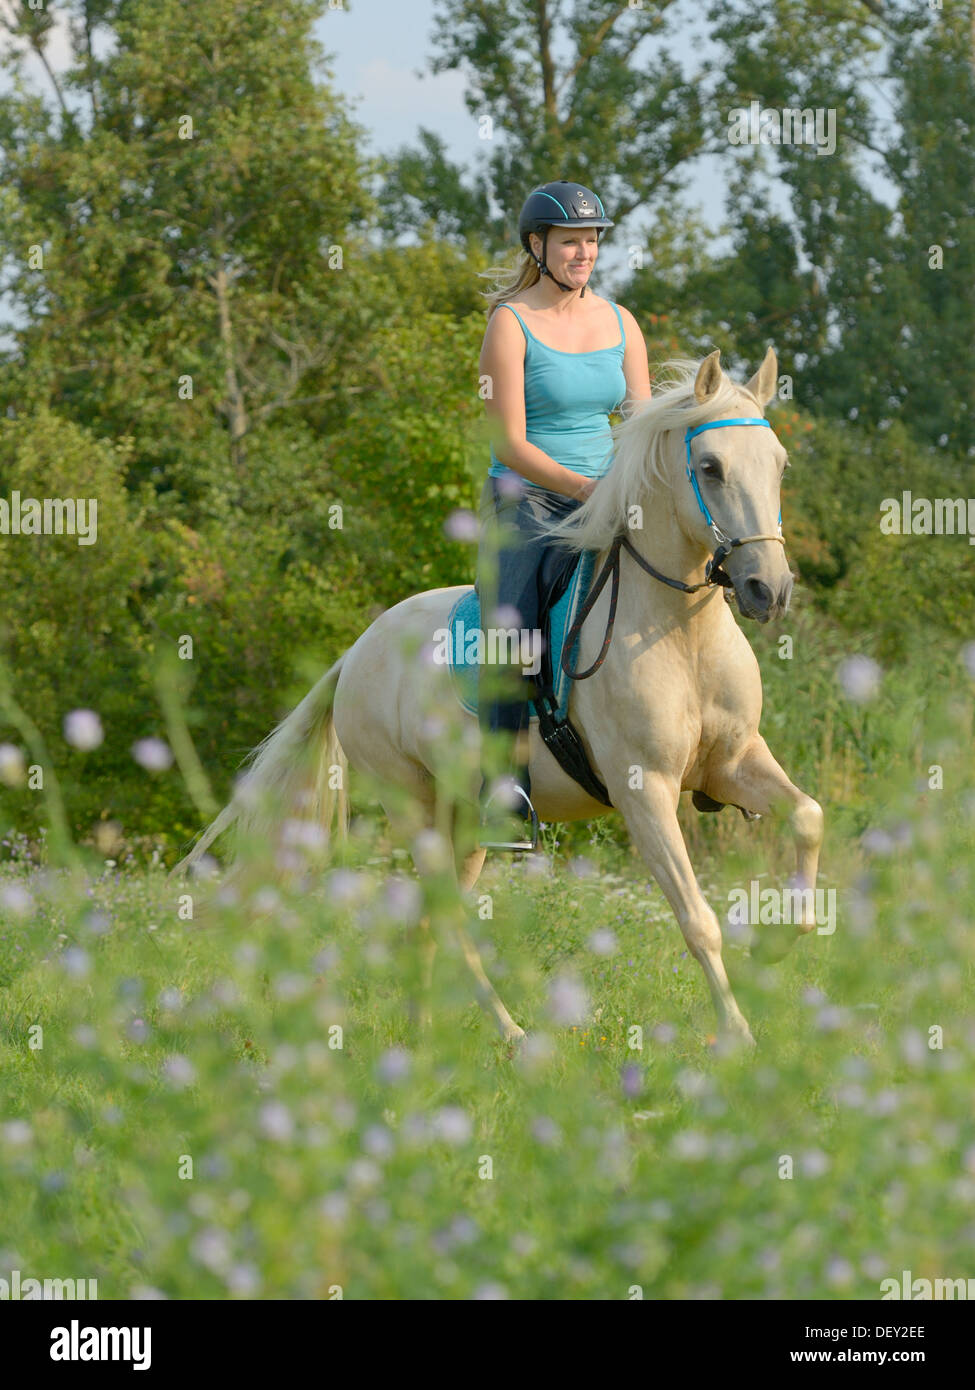 Rider on back of a Paso Fino horse galloping in a meadow Stock Photo